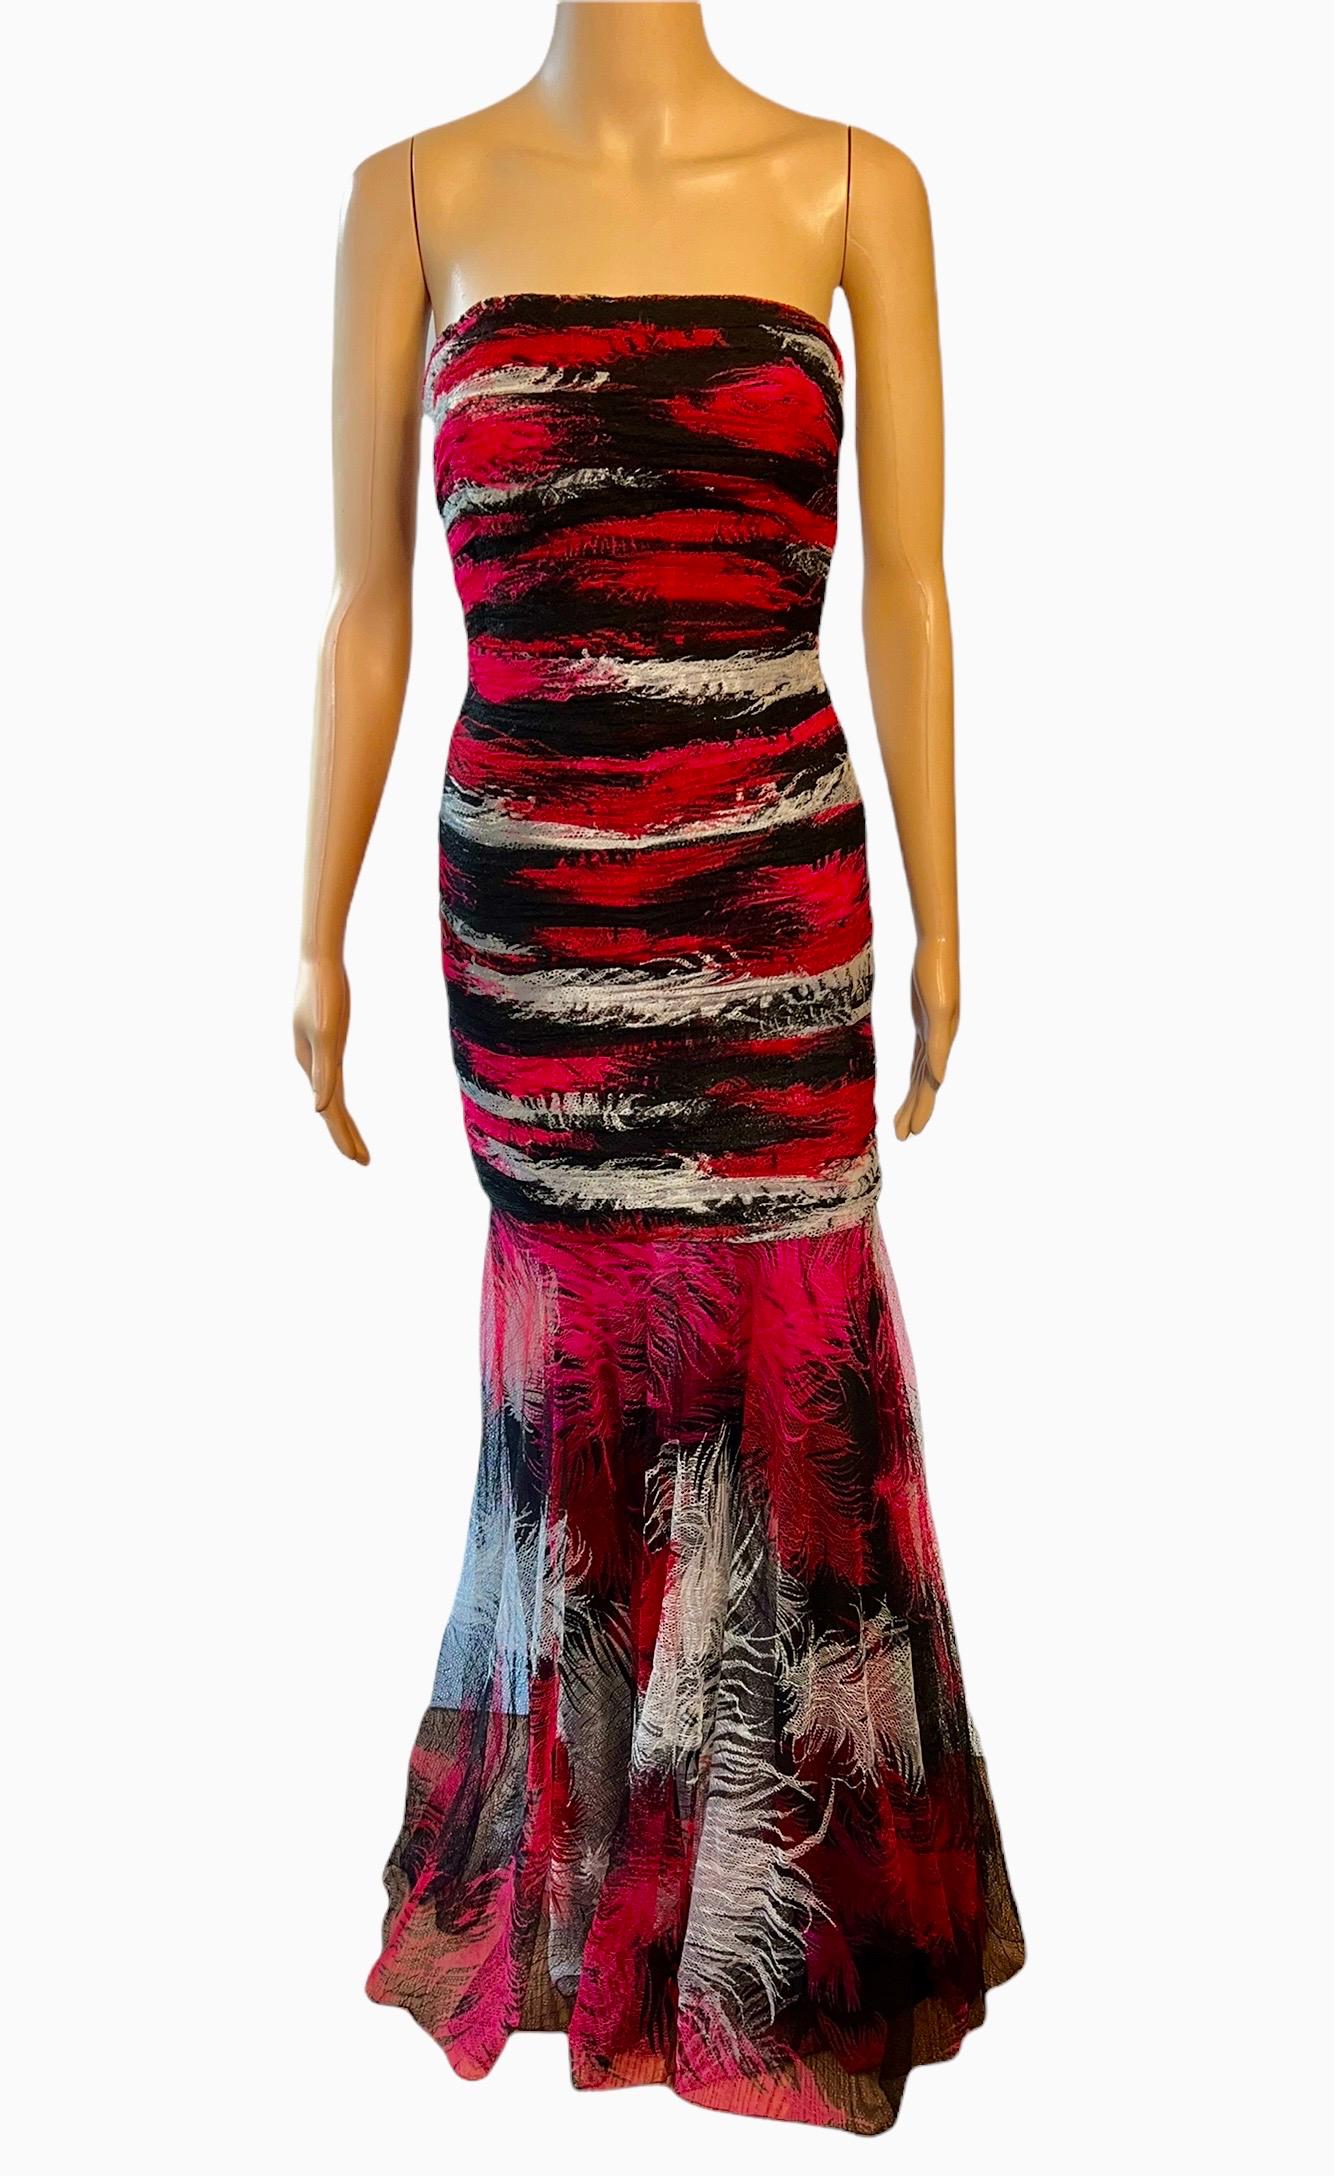 Gianni Versace F/W 2001 Runway Bustier Feather Print Silk Evening Dress Gown For Sale 1